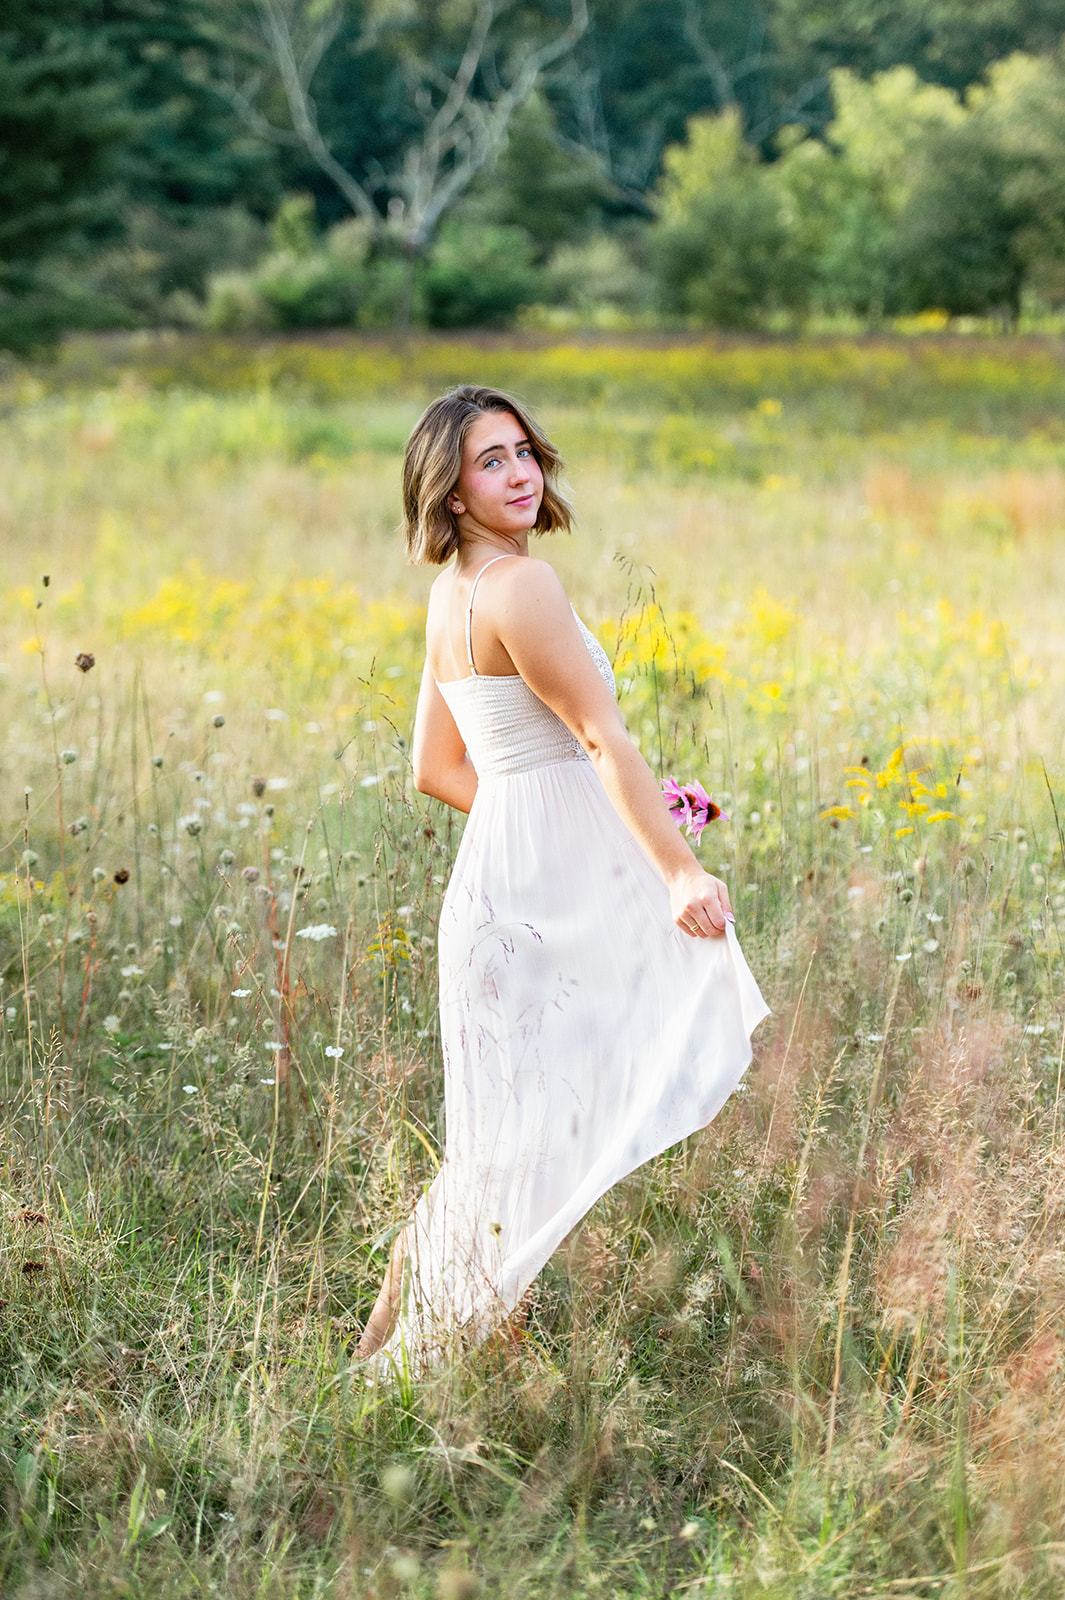 Beautiful senior girl walking through a wildflower field with a flowing dress, looking back smiling. 